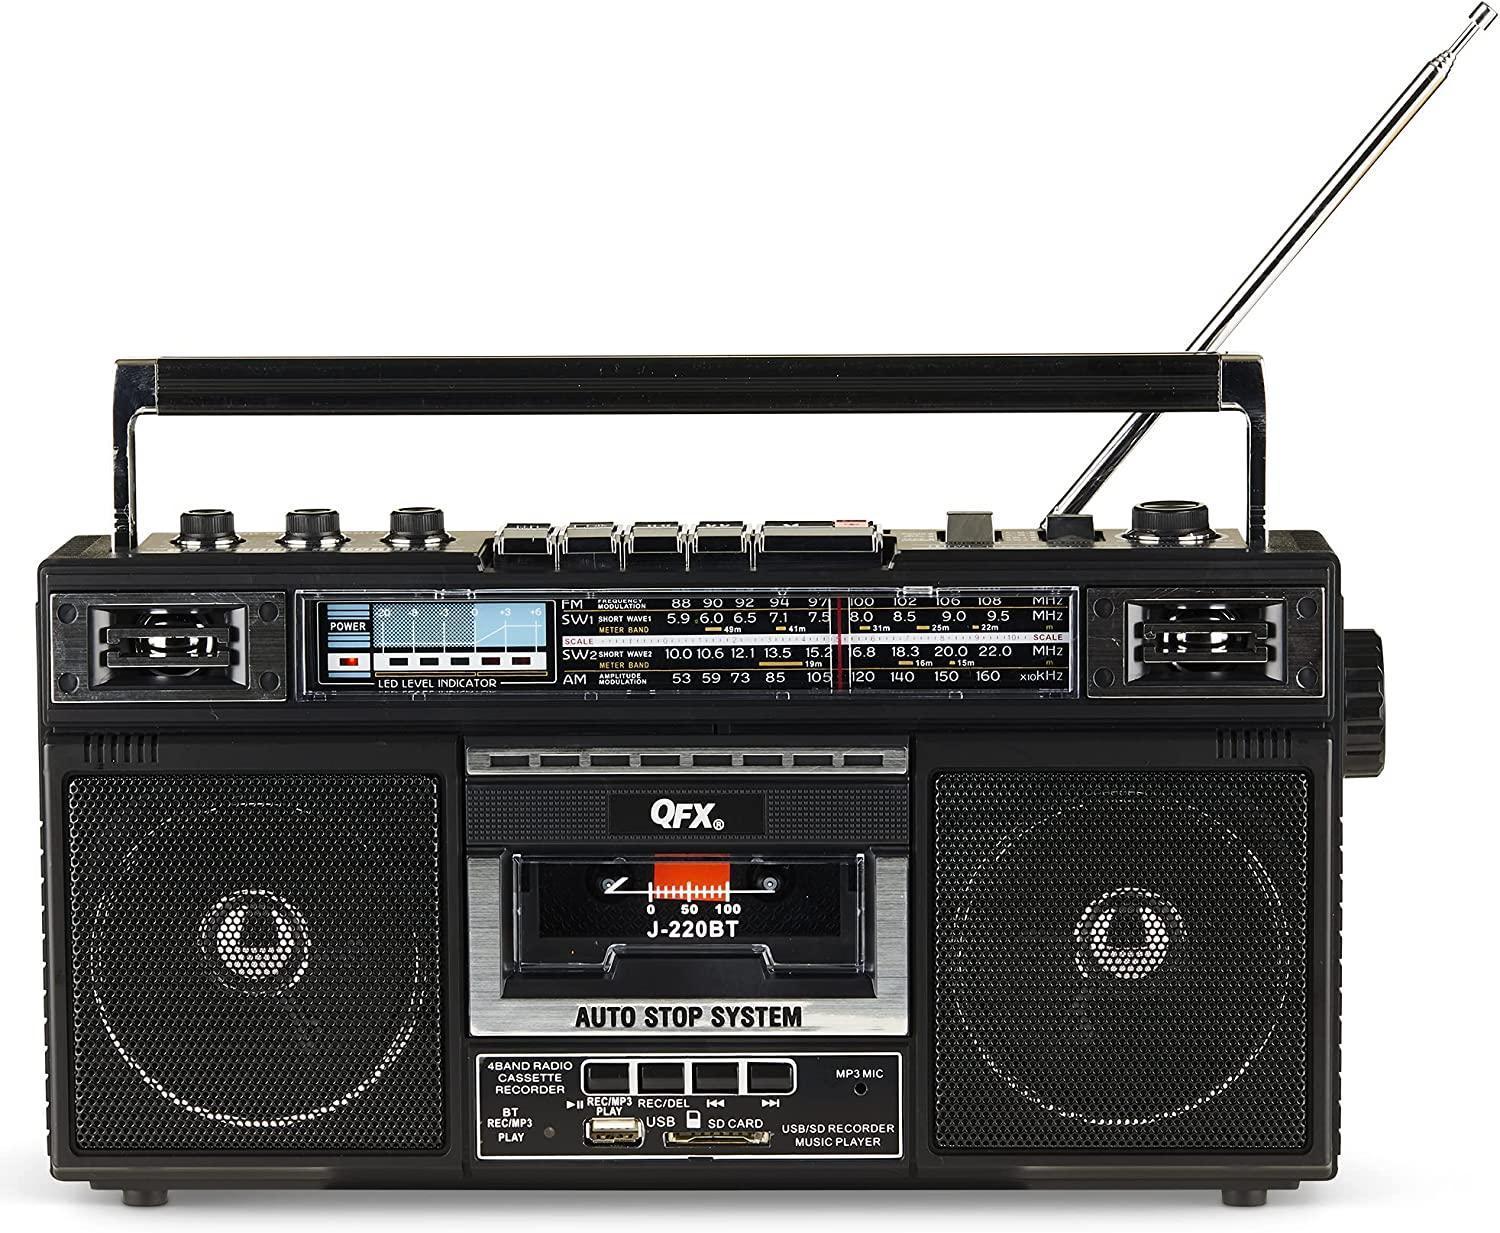 QFX J-220BT ReRun X Cassette Player/Recorder Boombox 4-Band (AM, FM, SW1, SW2) Bluetooth Portable Recording Boombox with Dual 3” Speakers, Built-in Microphone, 3-Band Equalizer